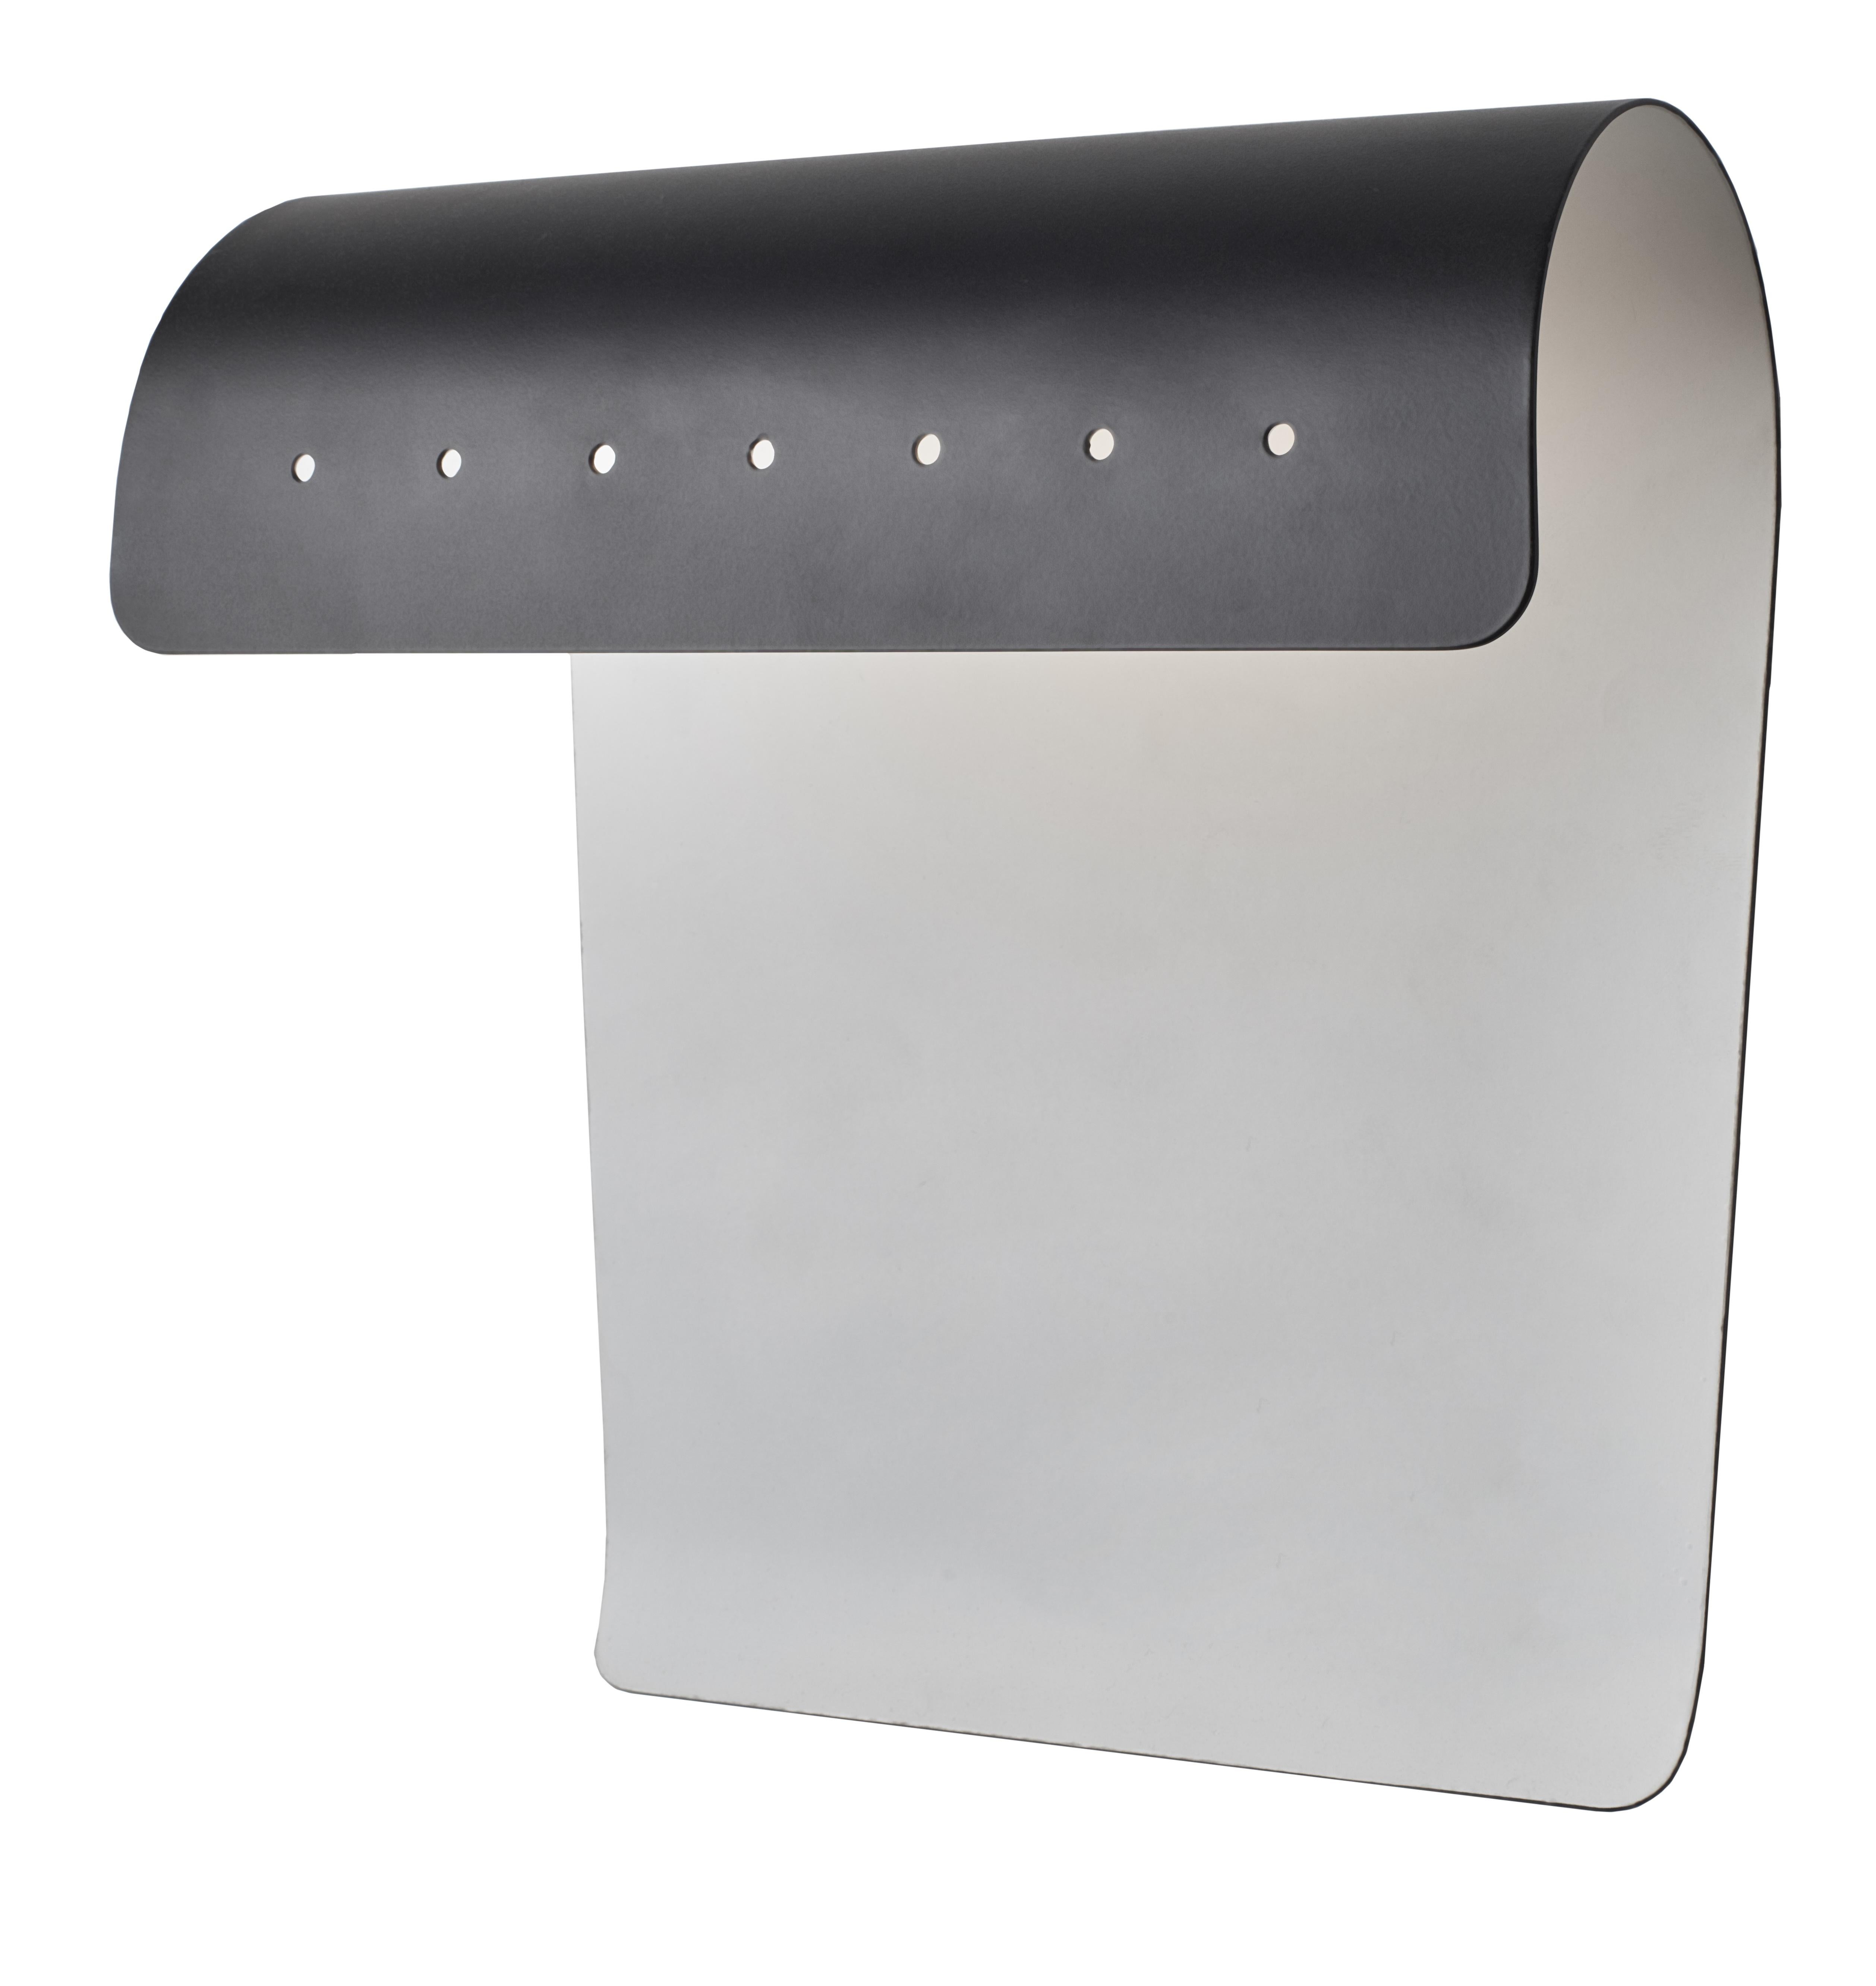 Biny curve wall lamp by Jacques Biny
Dimensions: D 23.9 x W 9.9 x H 21.5 cm
Materials: Aluminum, Steel
All our lamps can be wired according to each country. If sold to the USA it will be wired for the USA for instance.

Wall lamp in steel and